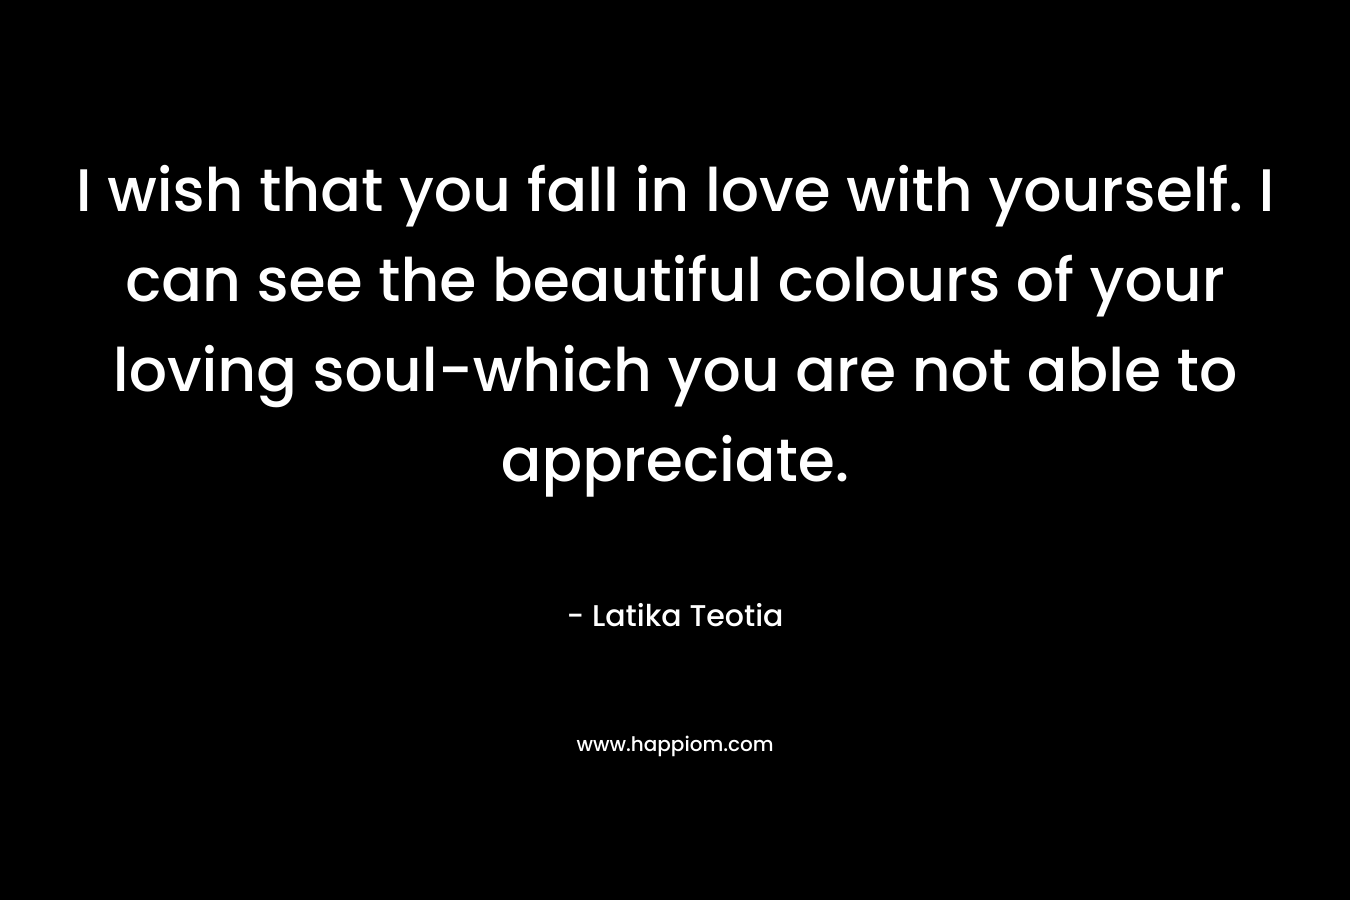 I wish that you fall in love with yourself. I can see the beautiful colours of your loving soul-which you are not able to appreciate. – Latika Teotia